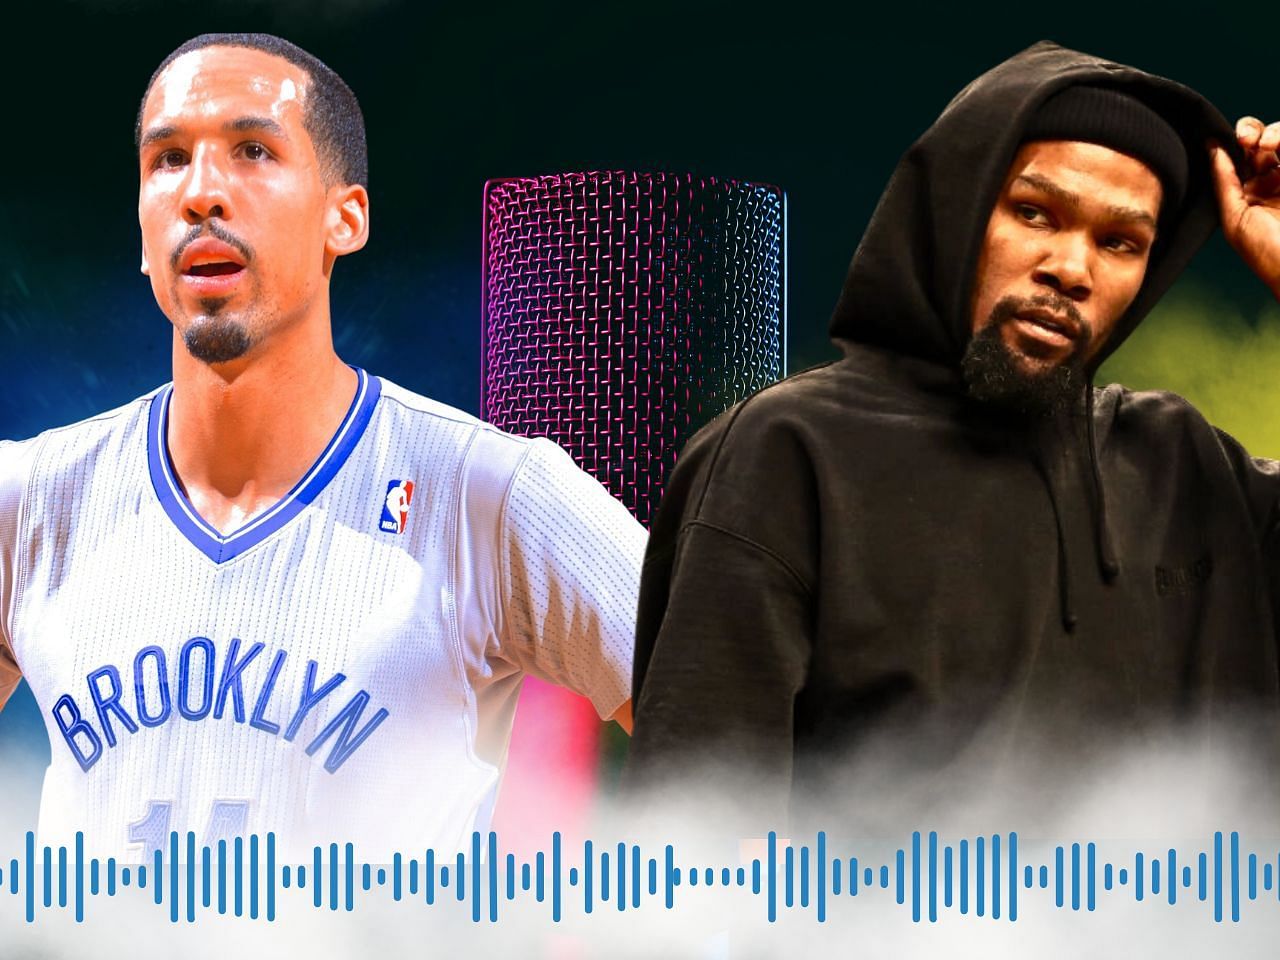 Shaun Livingston praised Kevin Durant and his work ethic when they played together.